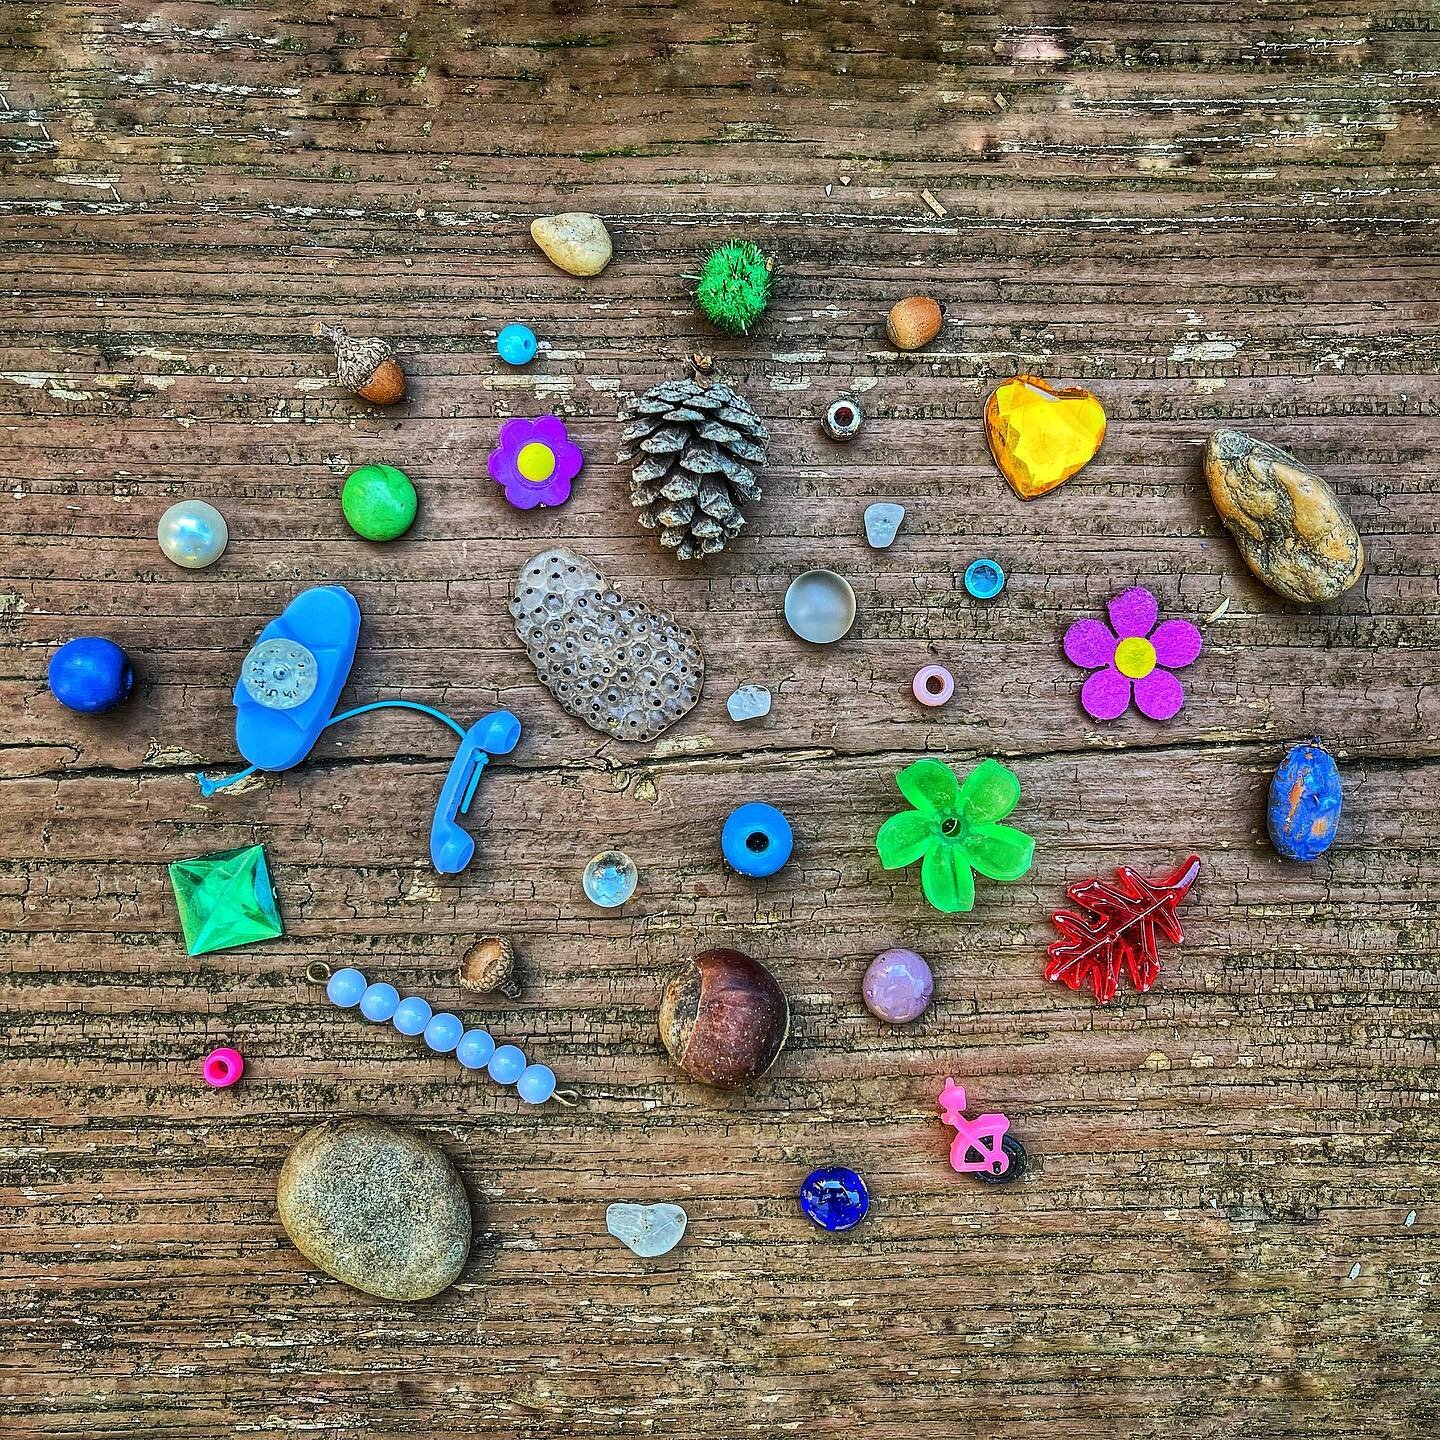 Treasures from a preschoolers pocket. Collected for 1 school year. #preschoollife #treasure #collection #avlmom #avlmoms